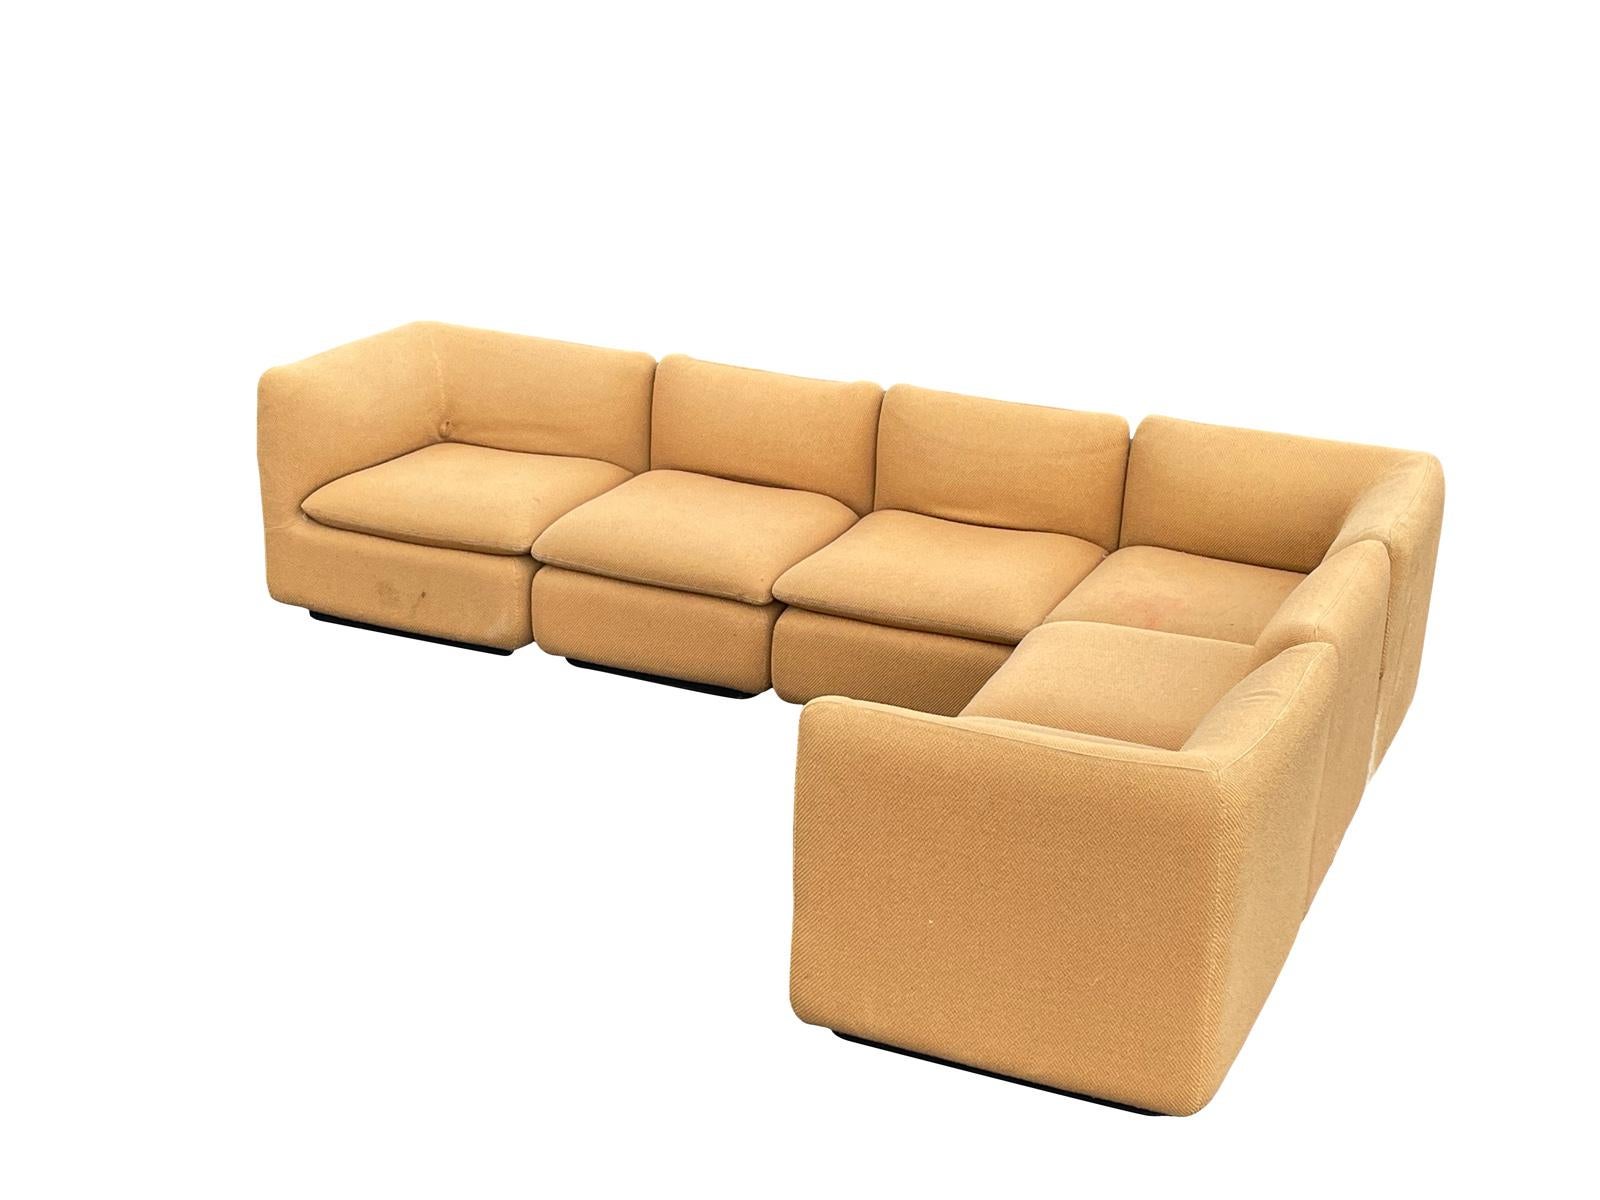 Mid-Century Modern 1980s Modular Ganging ELYSÉE Sofa Unit Sectional by Steelcase  For Sale